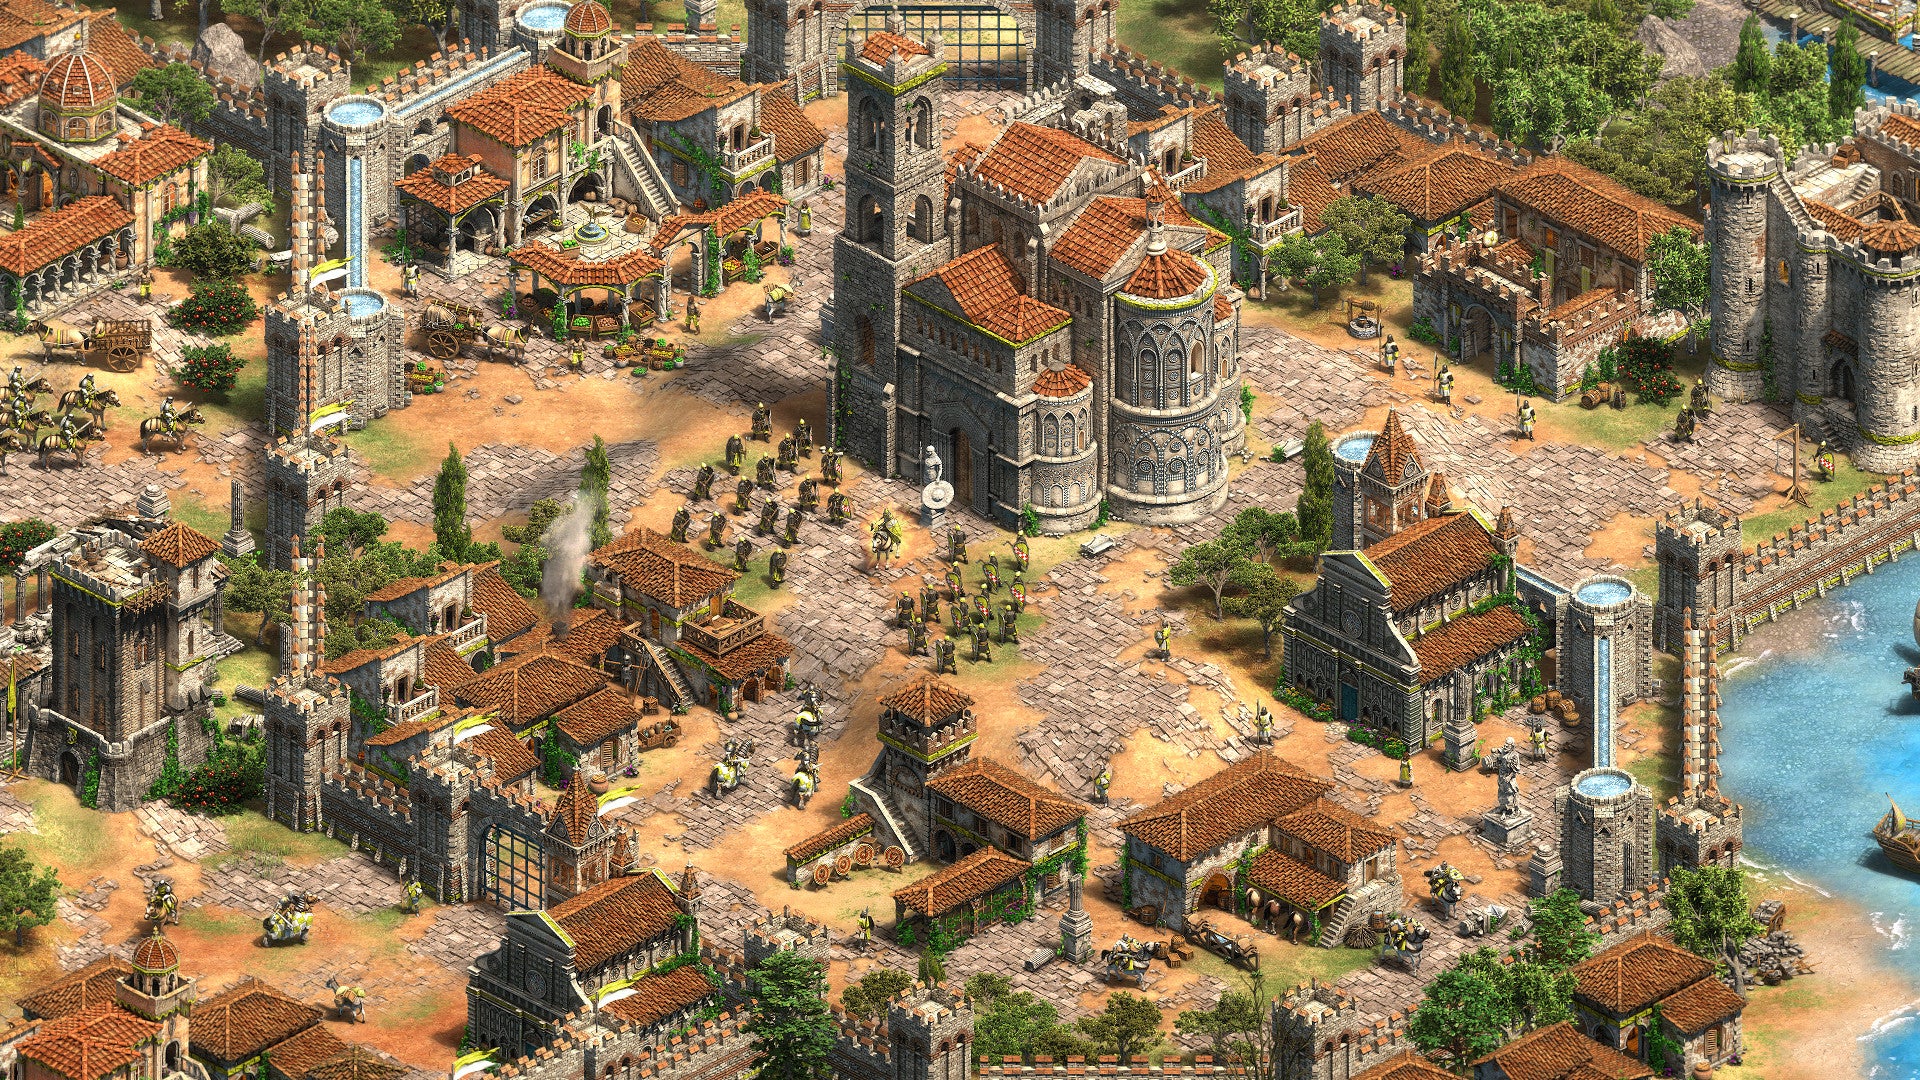 Age of Empires II Defintive Edition - Lords of the West DLC